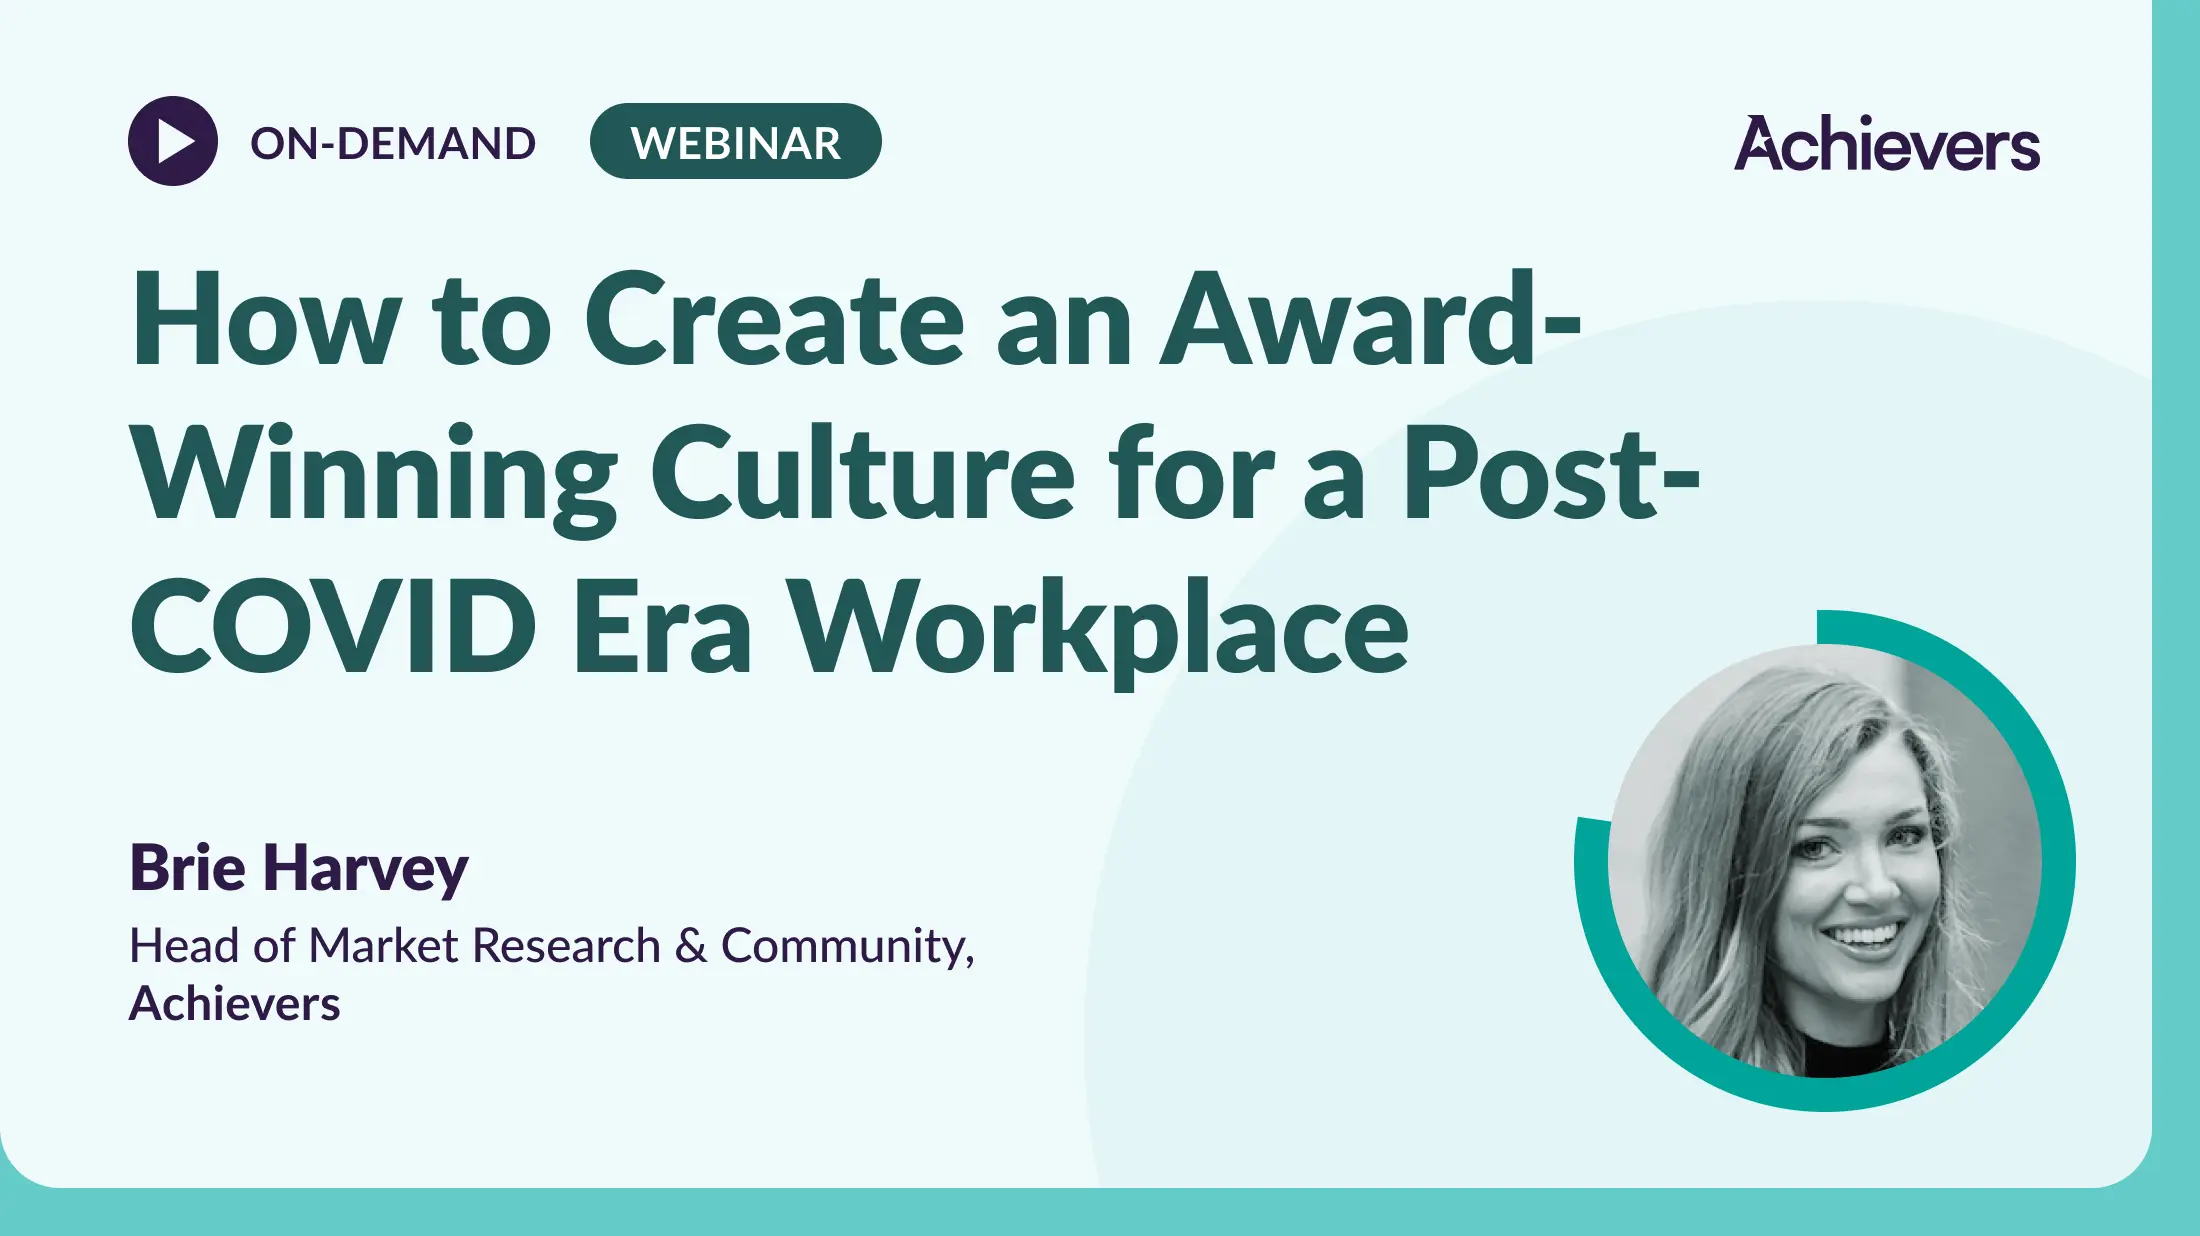 How to Create an Award-Winning Culture for a Post-COVID Era Workplace Webinar